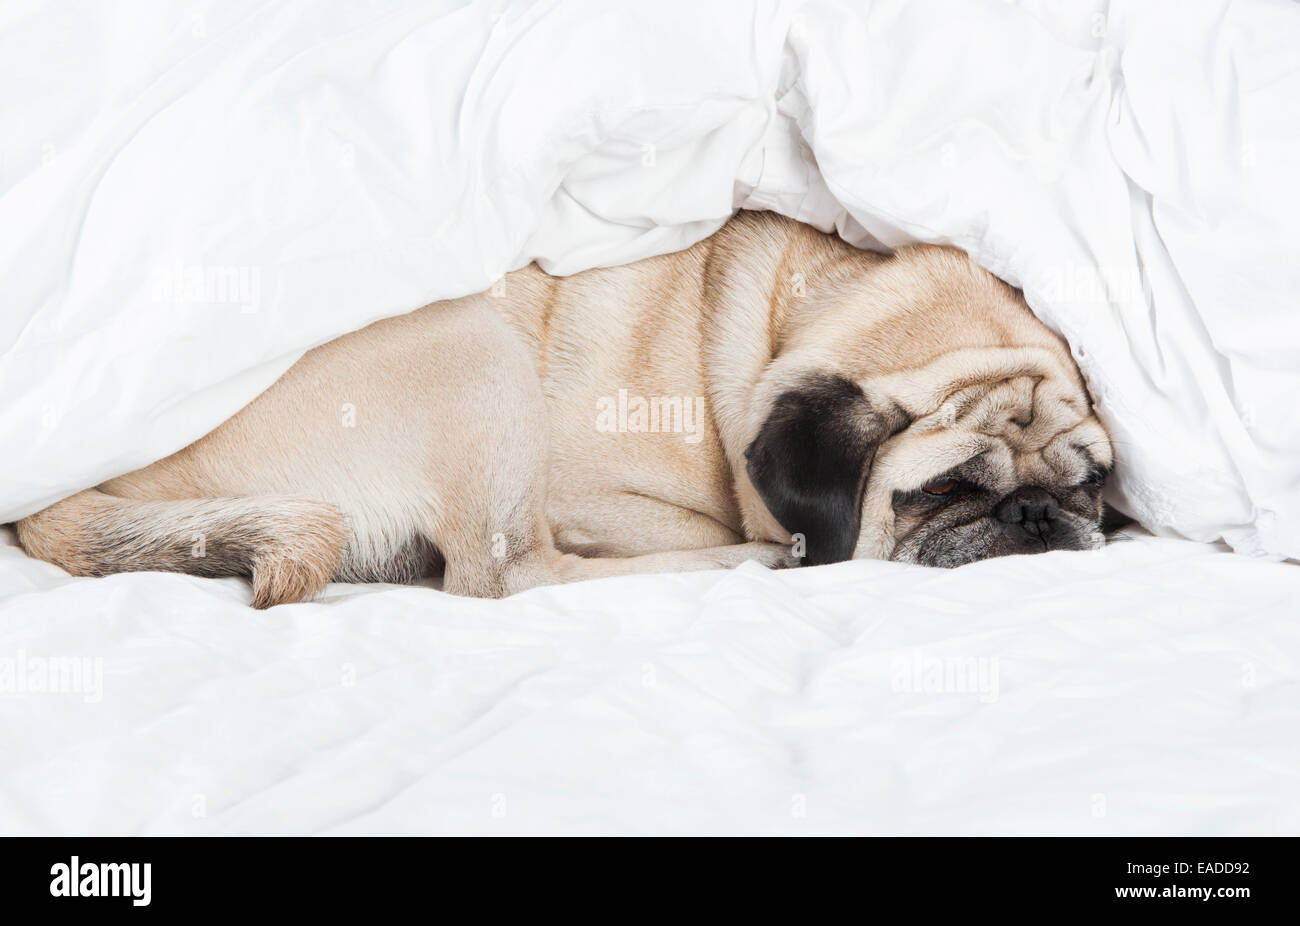 Pug male dog with cream colored fur lying on a white blanket Stock Photo